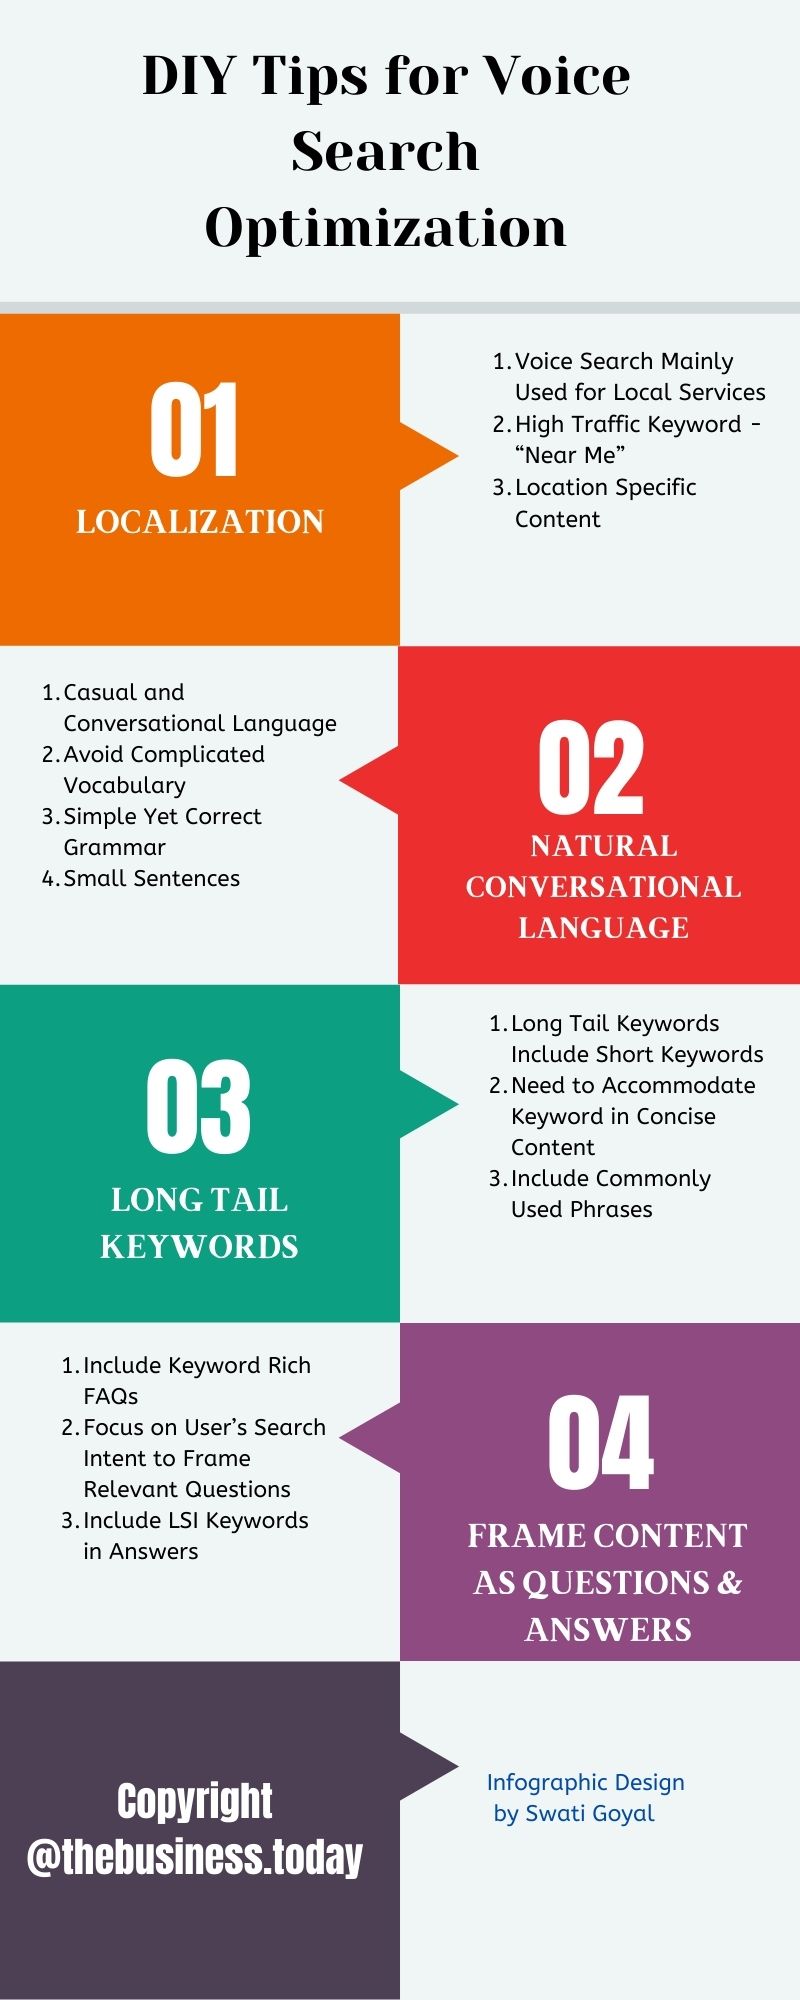 Infographic for Voice Search Optimization